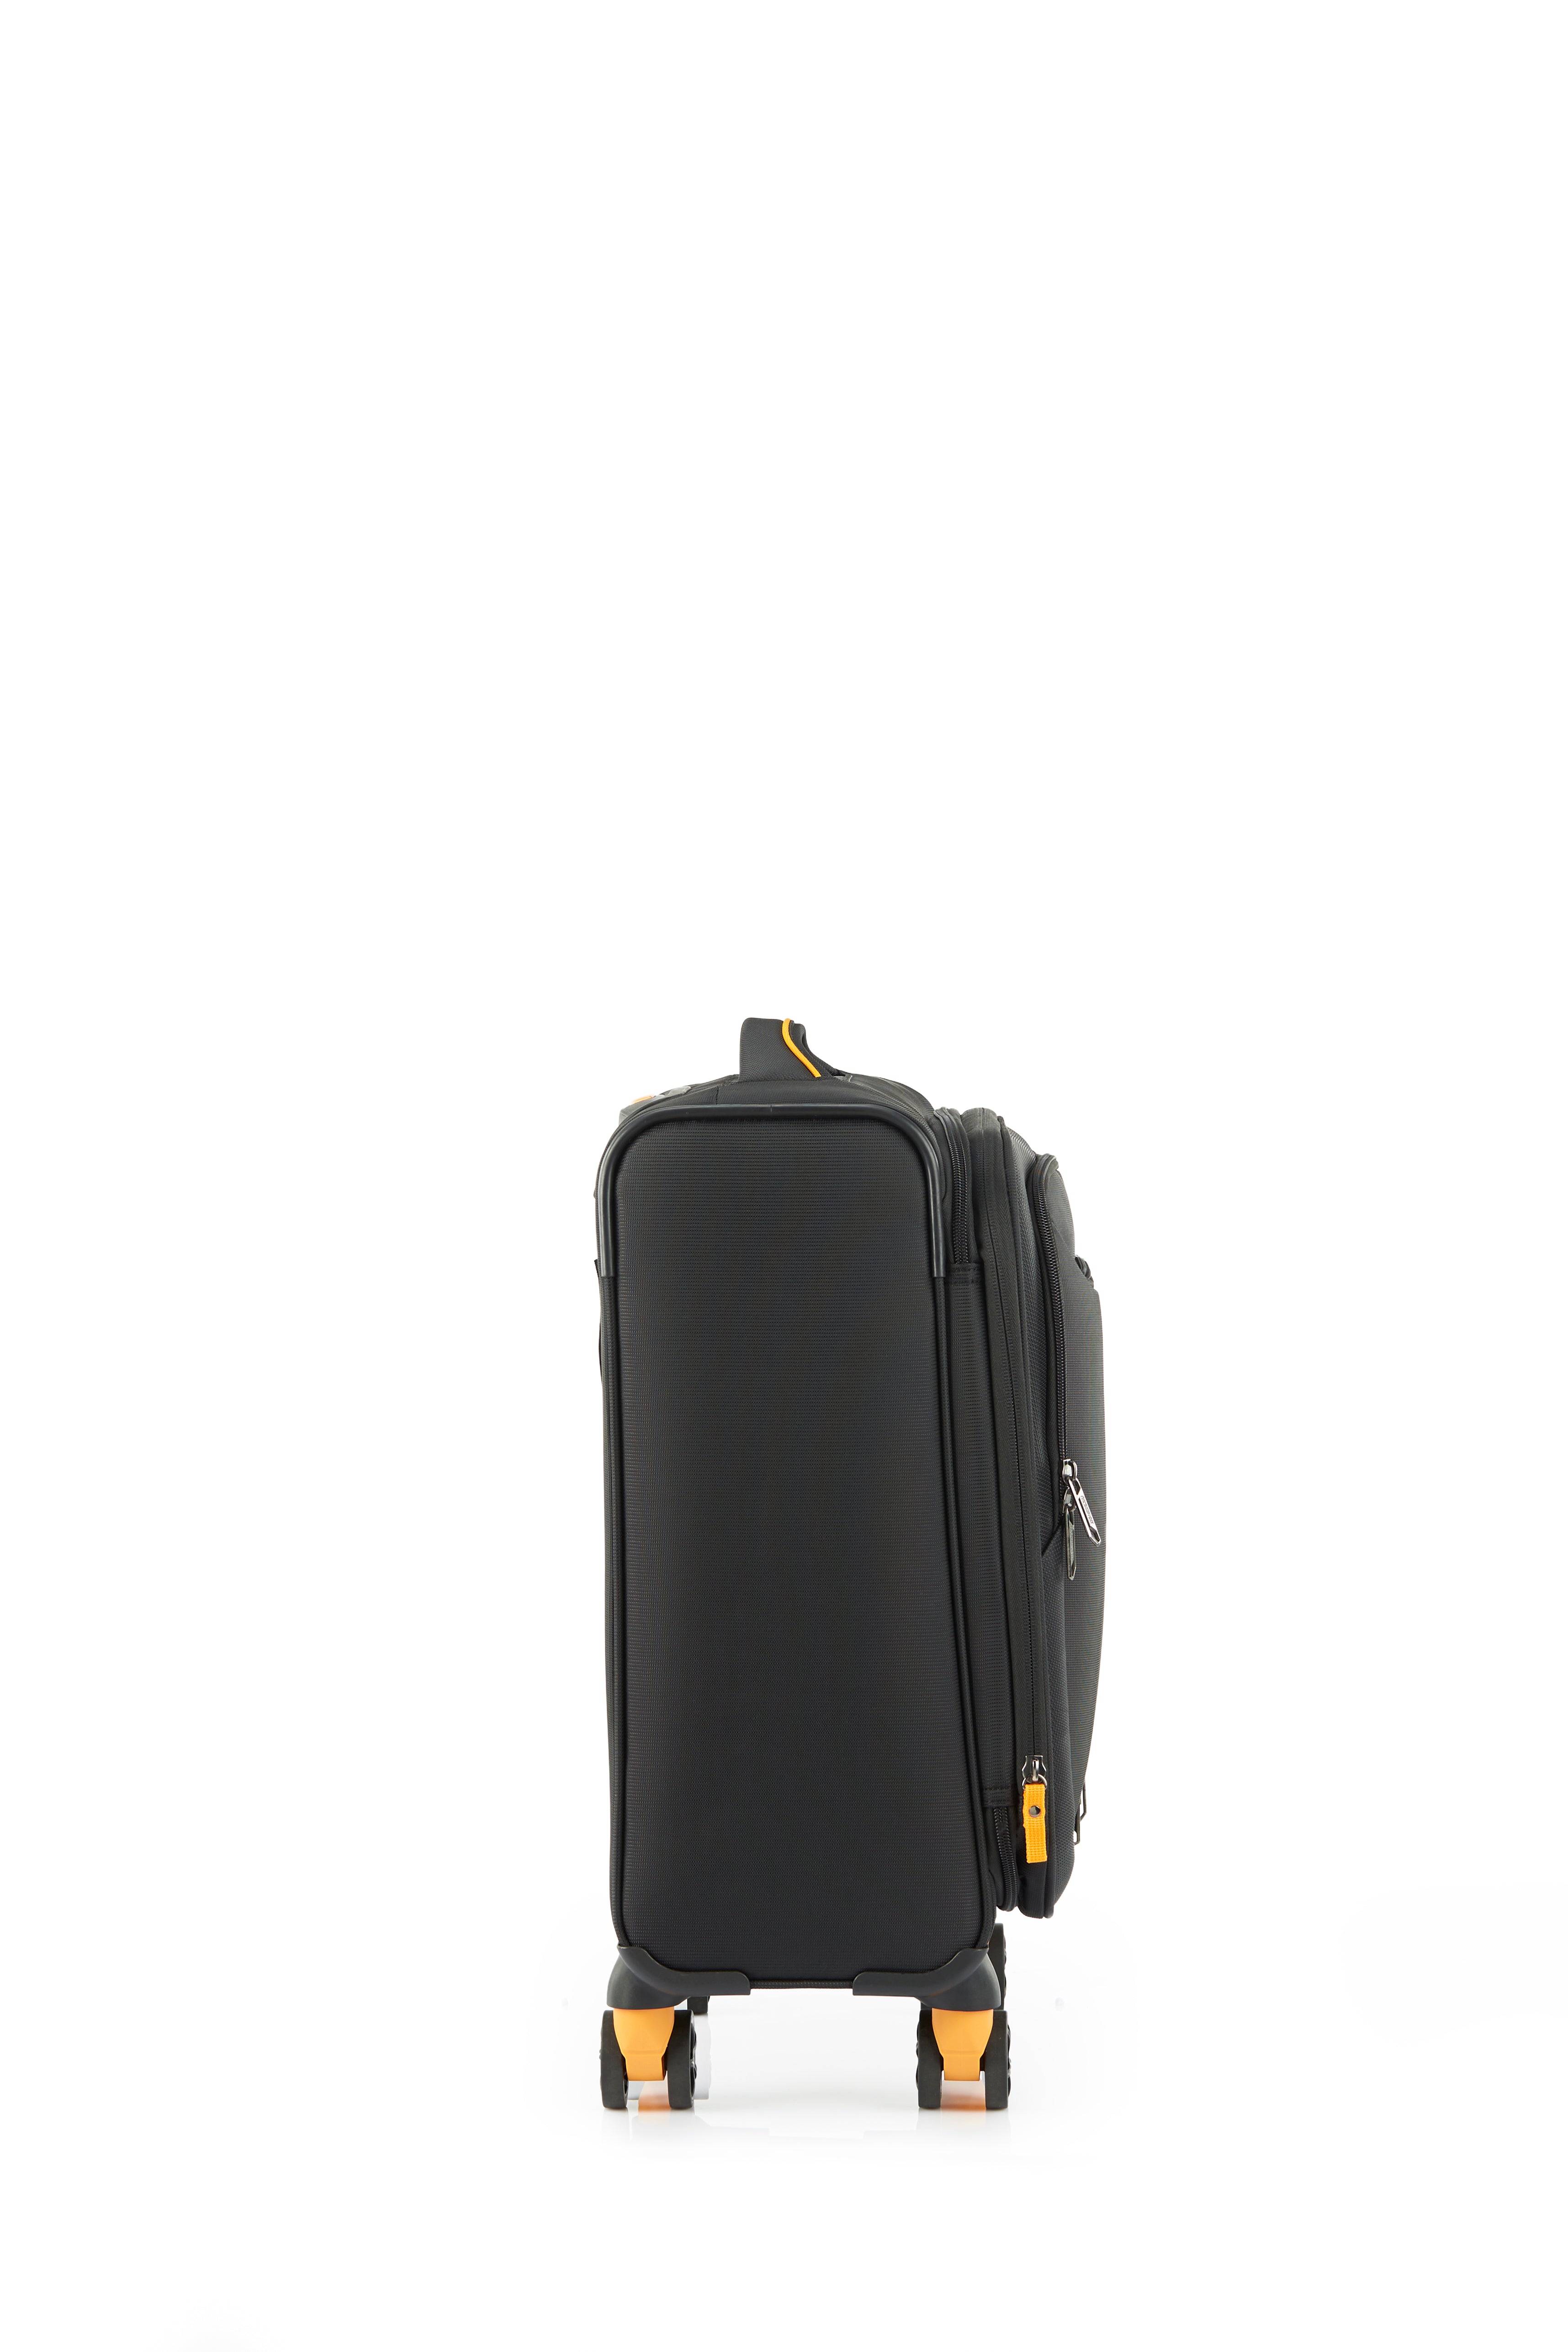 American Tourister - Applite ECO 55cm Small Suitcase - Black/Must-3